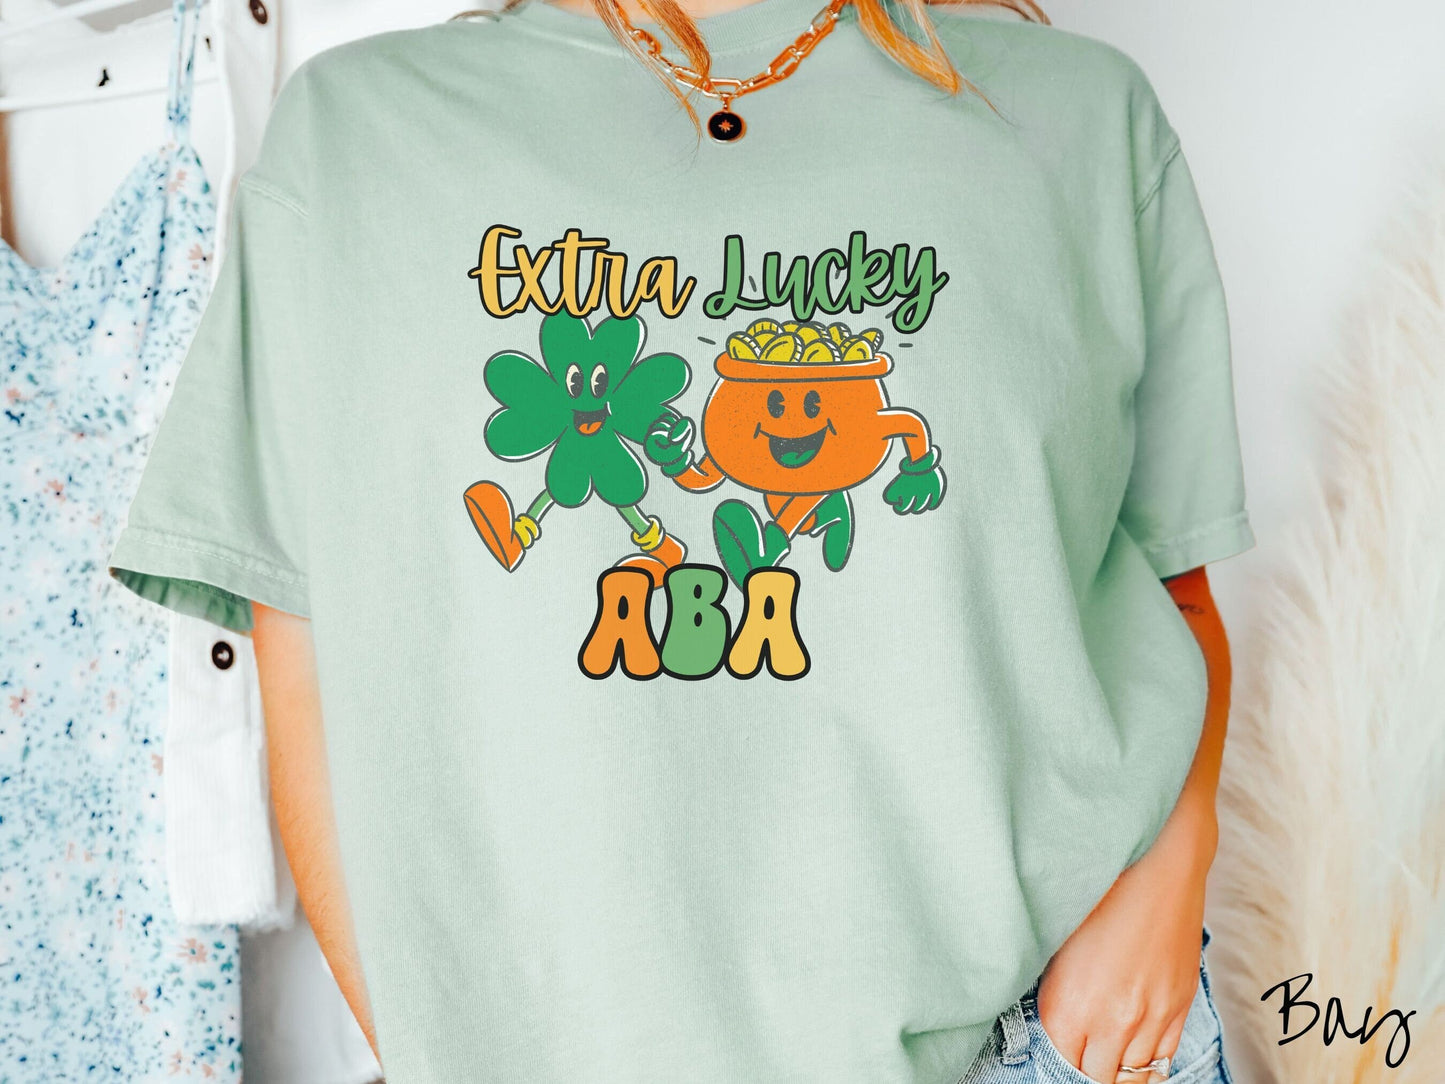 A woman wearing a vintage, bay colored shirt with the text Extra Lucky ABA in yellow, orange, and green font. Between the text are a green clover and orange pot of gold smiling and walking together in step.